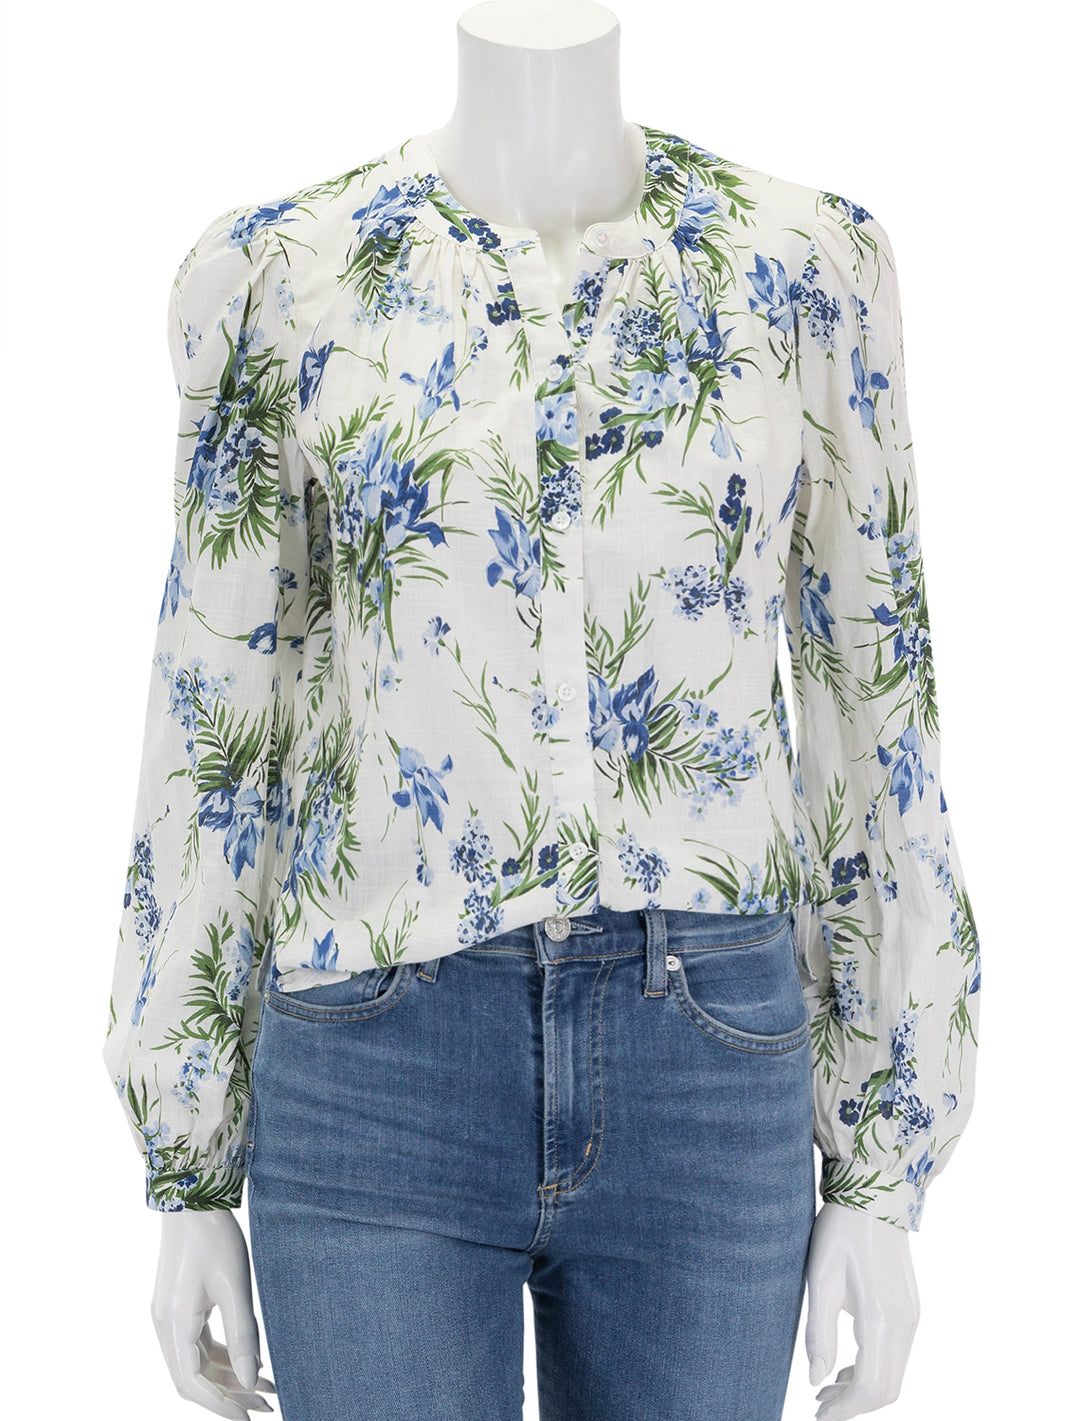 Front view of Veronica Beard's ashlynn top in off white floral.